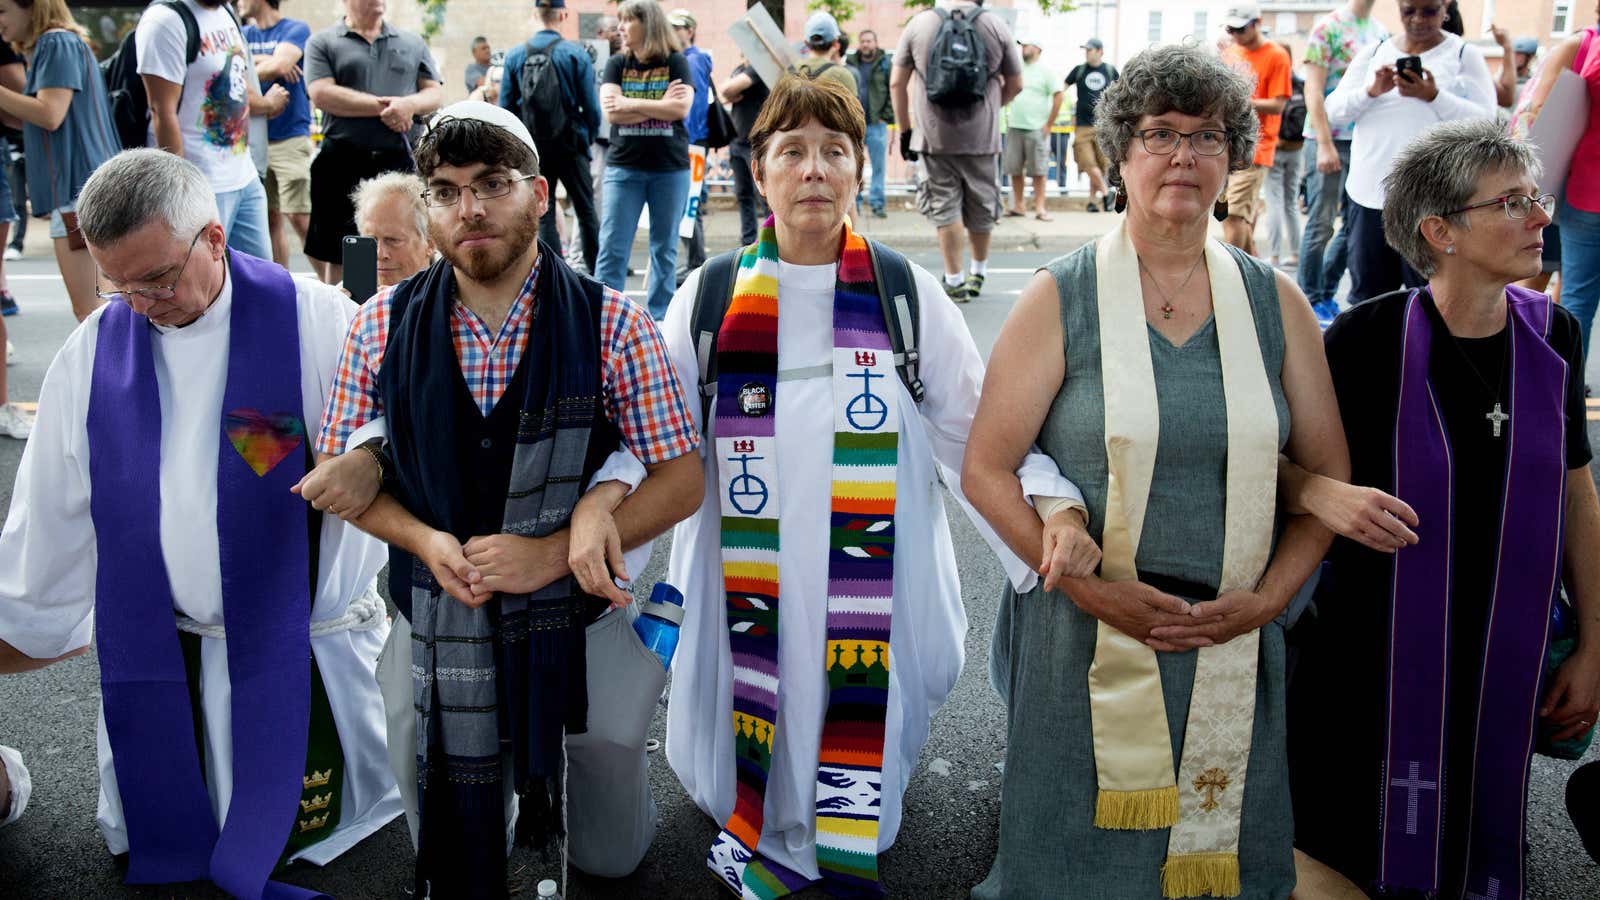 Local clergy leaders link arms at a counter-protest in Charlottesville on Saturday, Aug. 12.